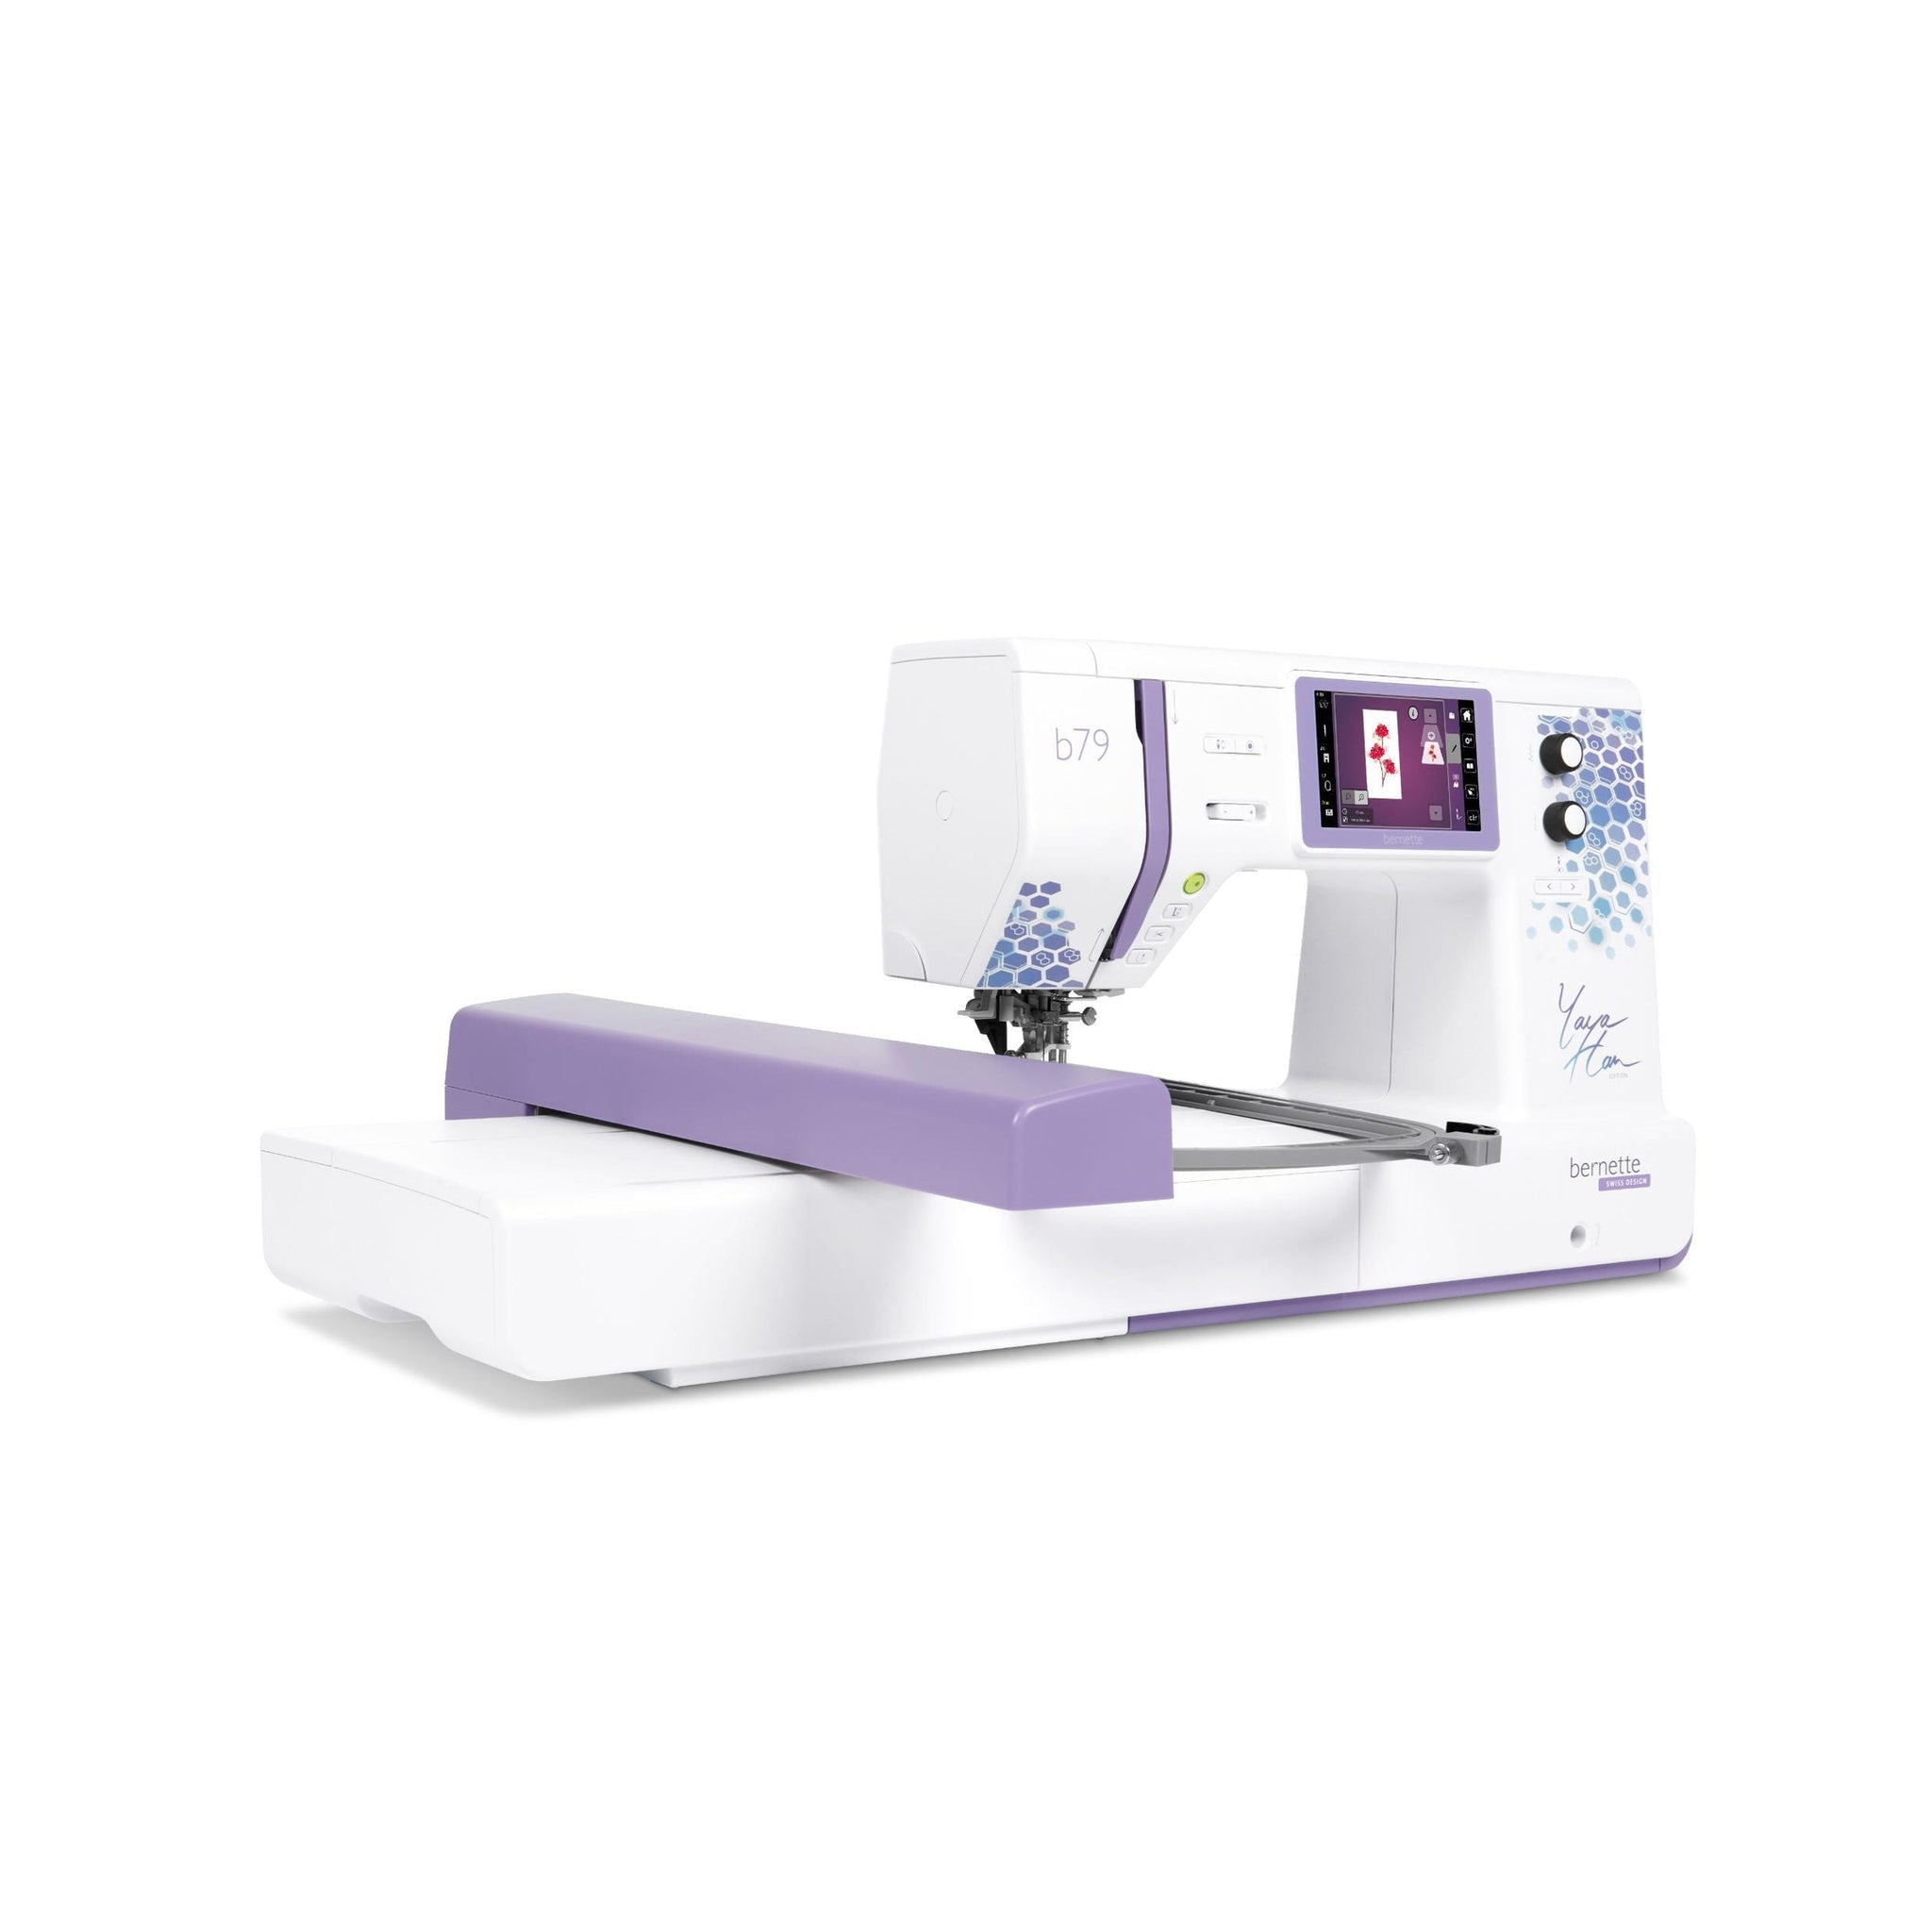 –　gather　Edition　online　bernette　b79　Embroidery　here　Yaya　Machine　Han　Sewing